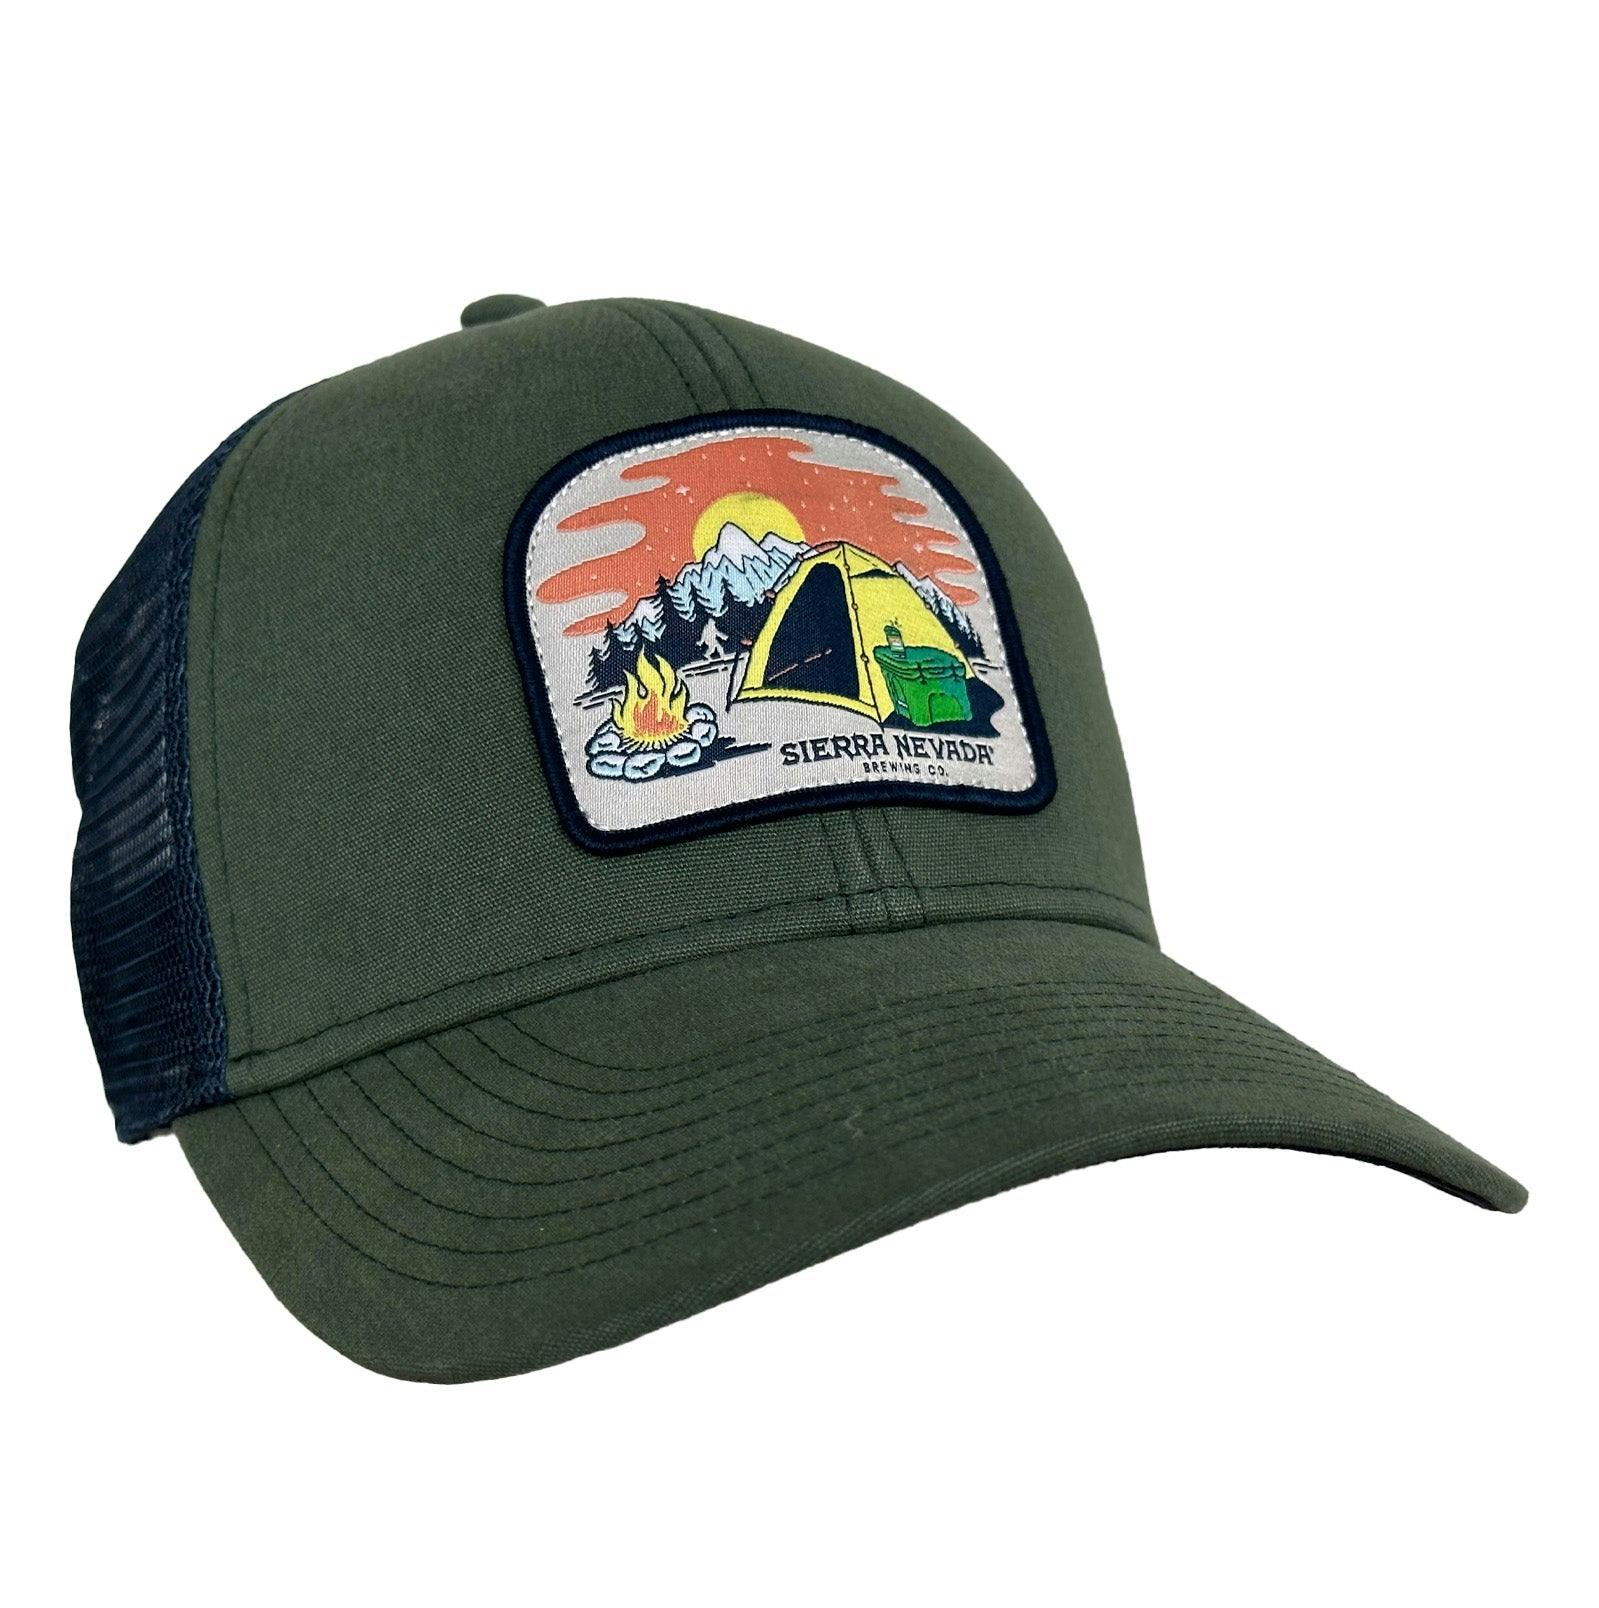 Sierra Nevada Brewing Co. Camp Life Trucker Hat - front view